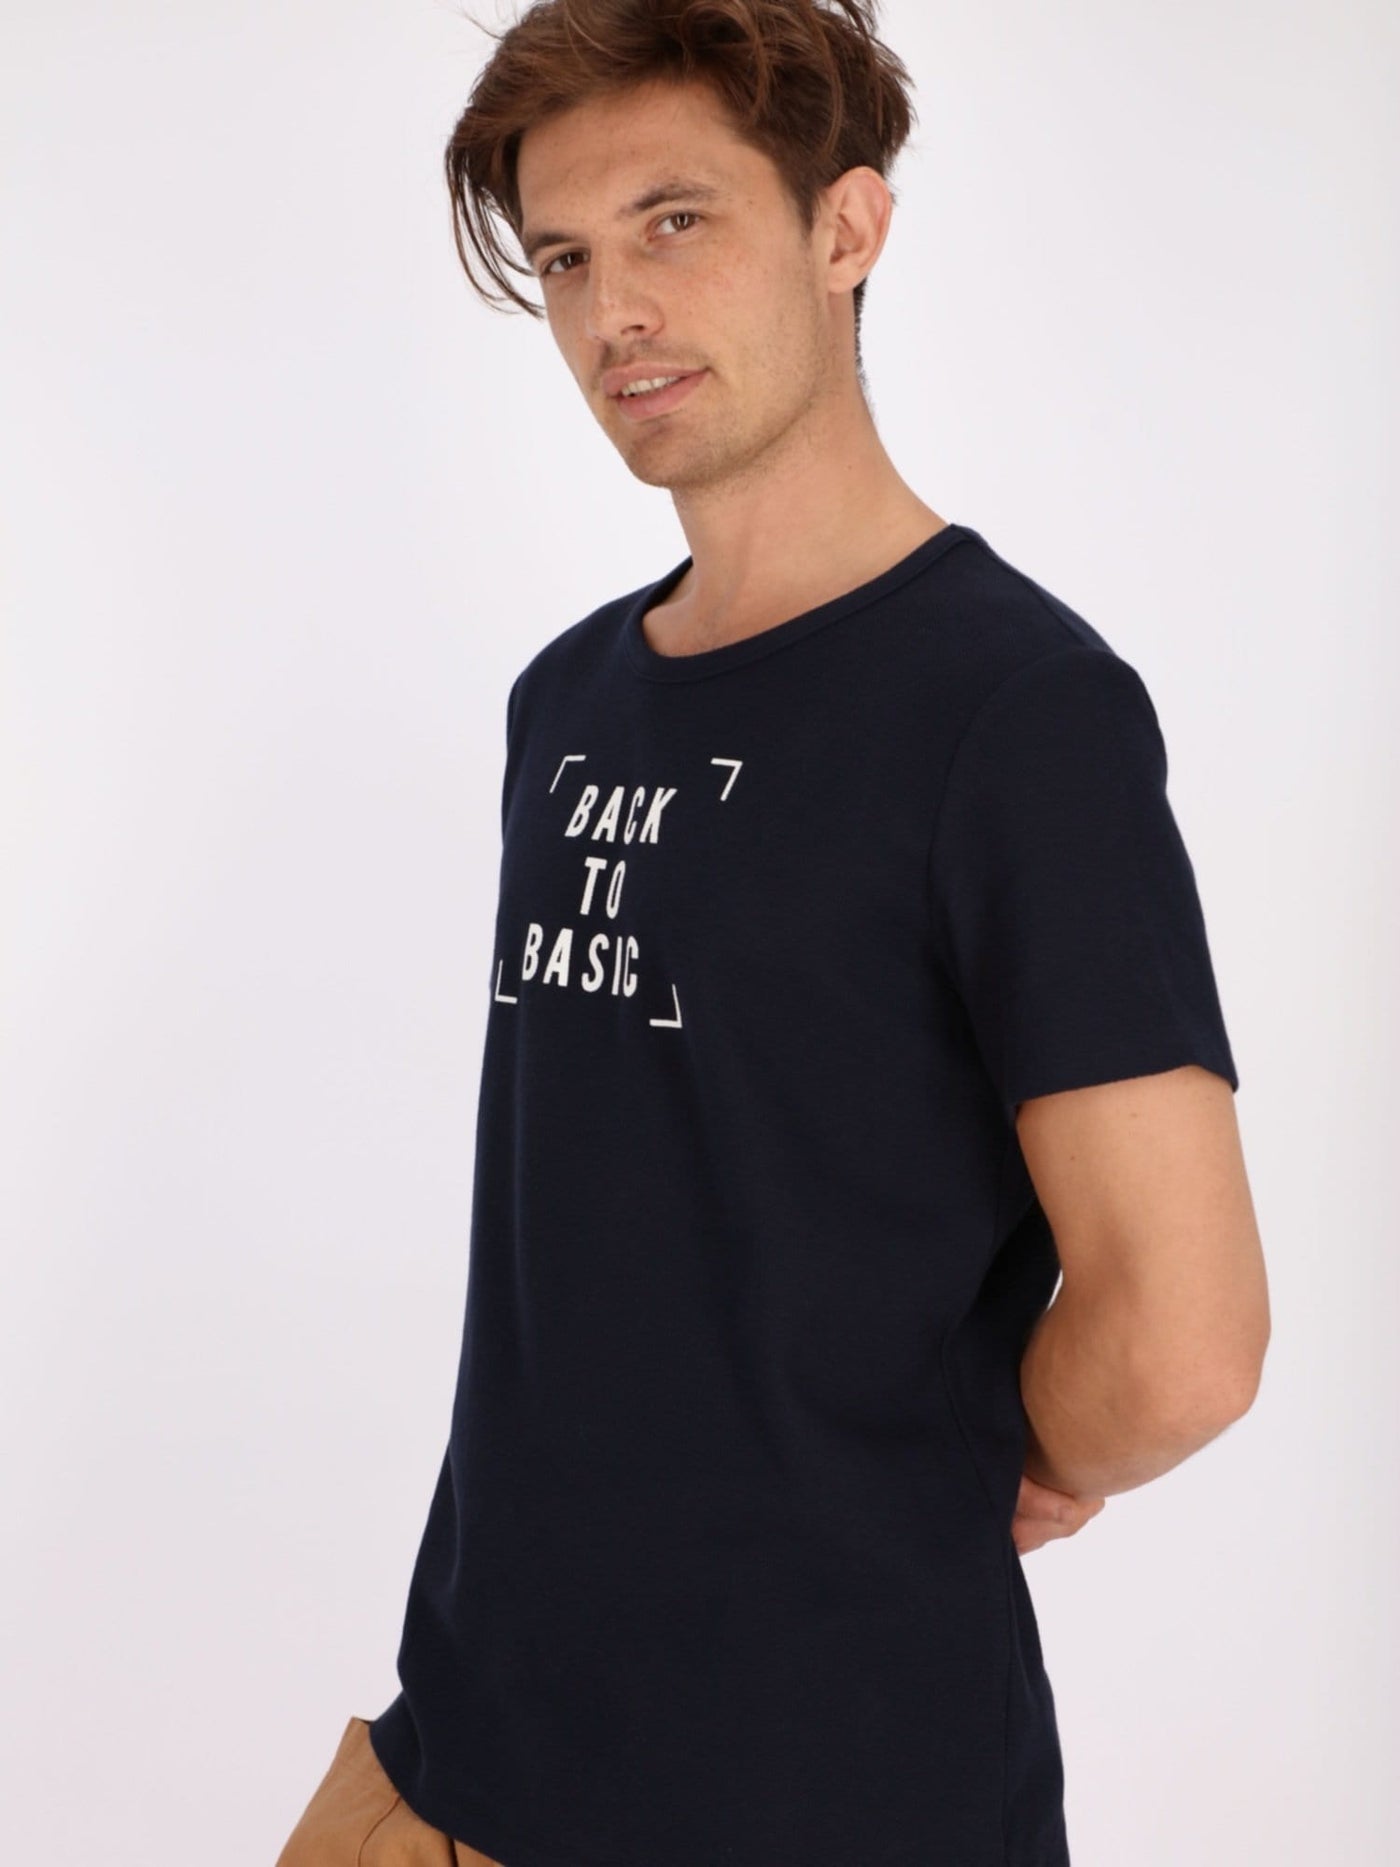 OR T-Shirts Front Text Print Back to Basic T-Shirt